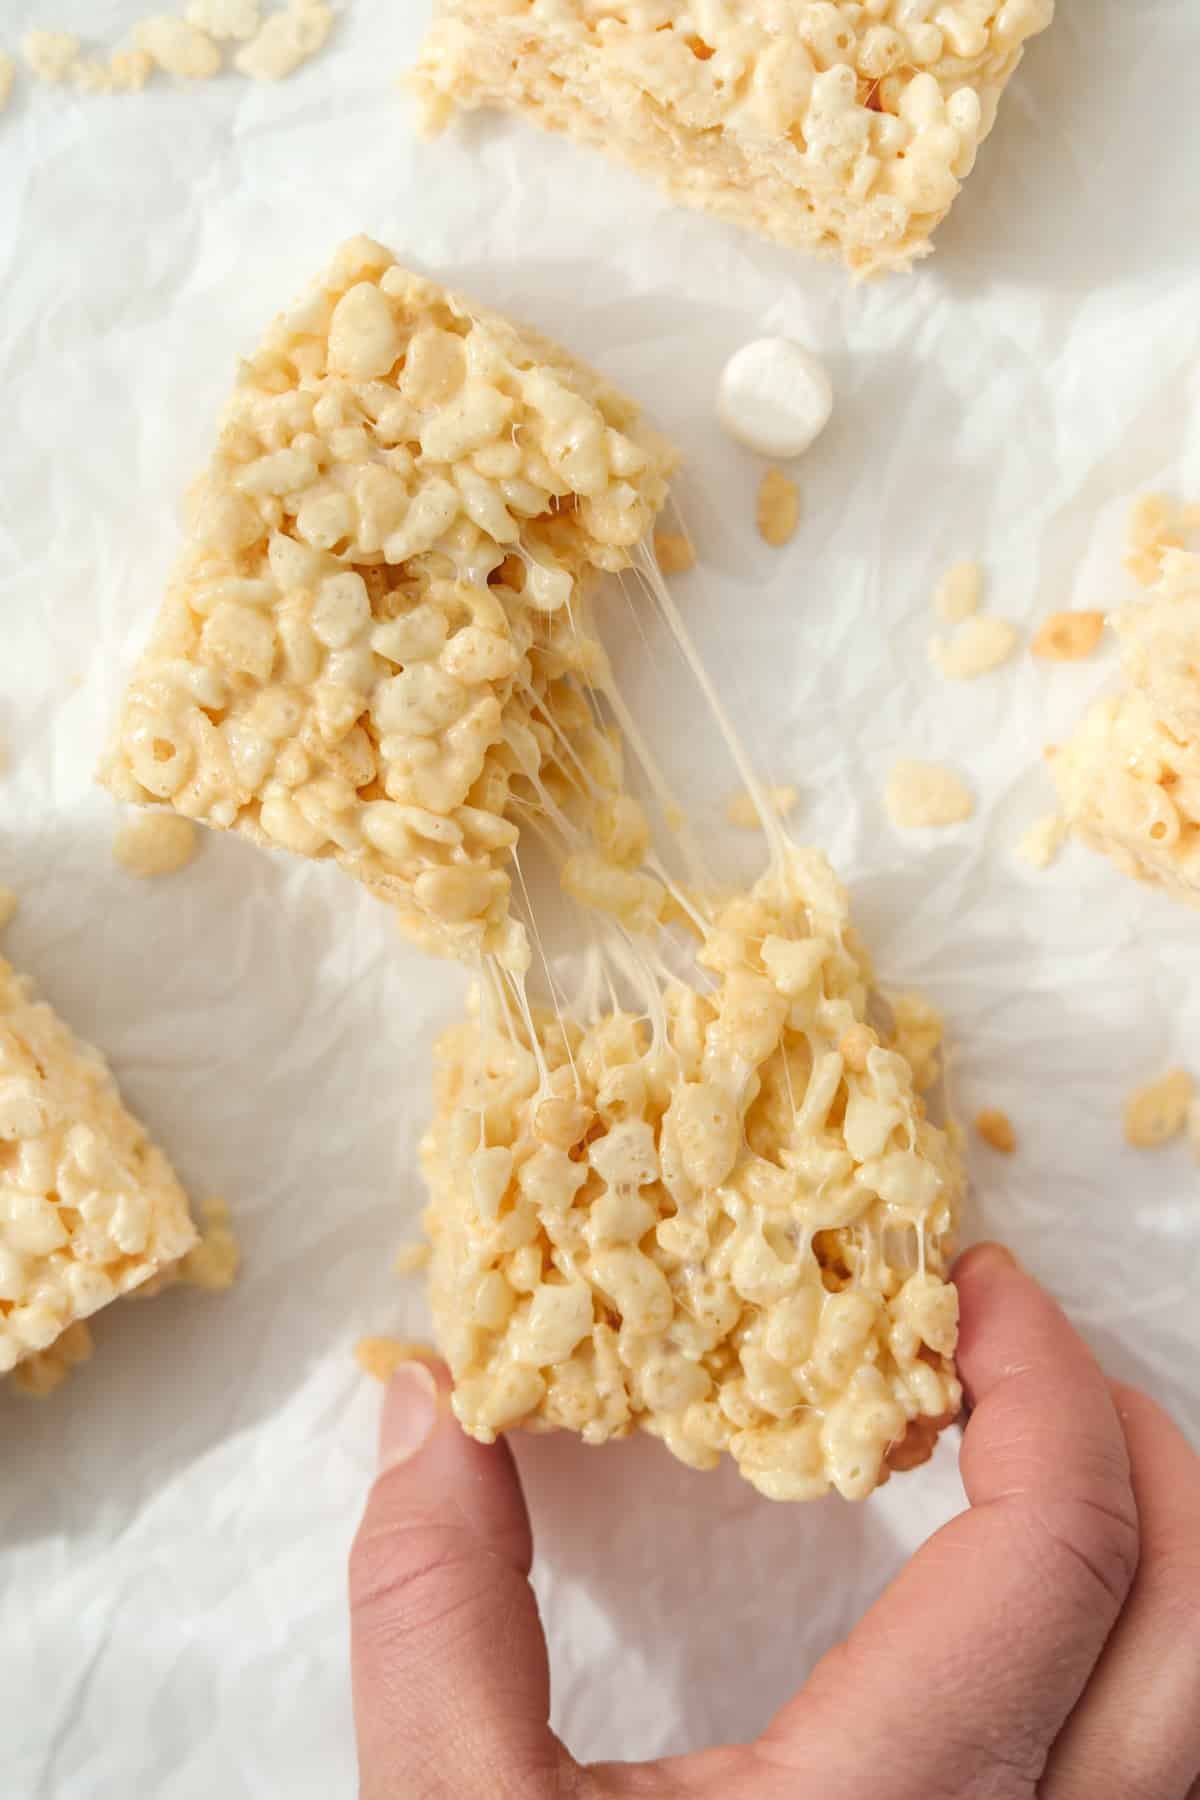 Pulling a cereal treat apart to show the gooey marshmallow.